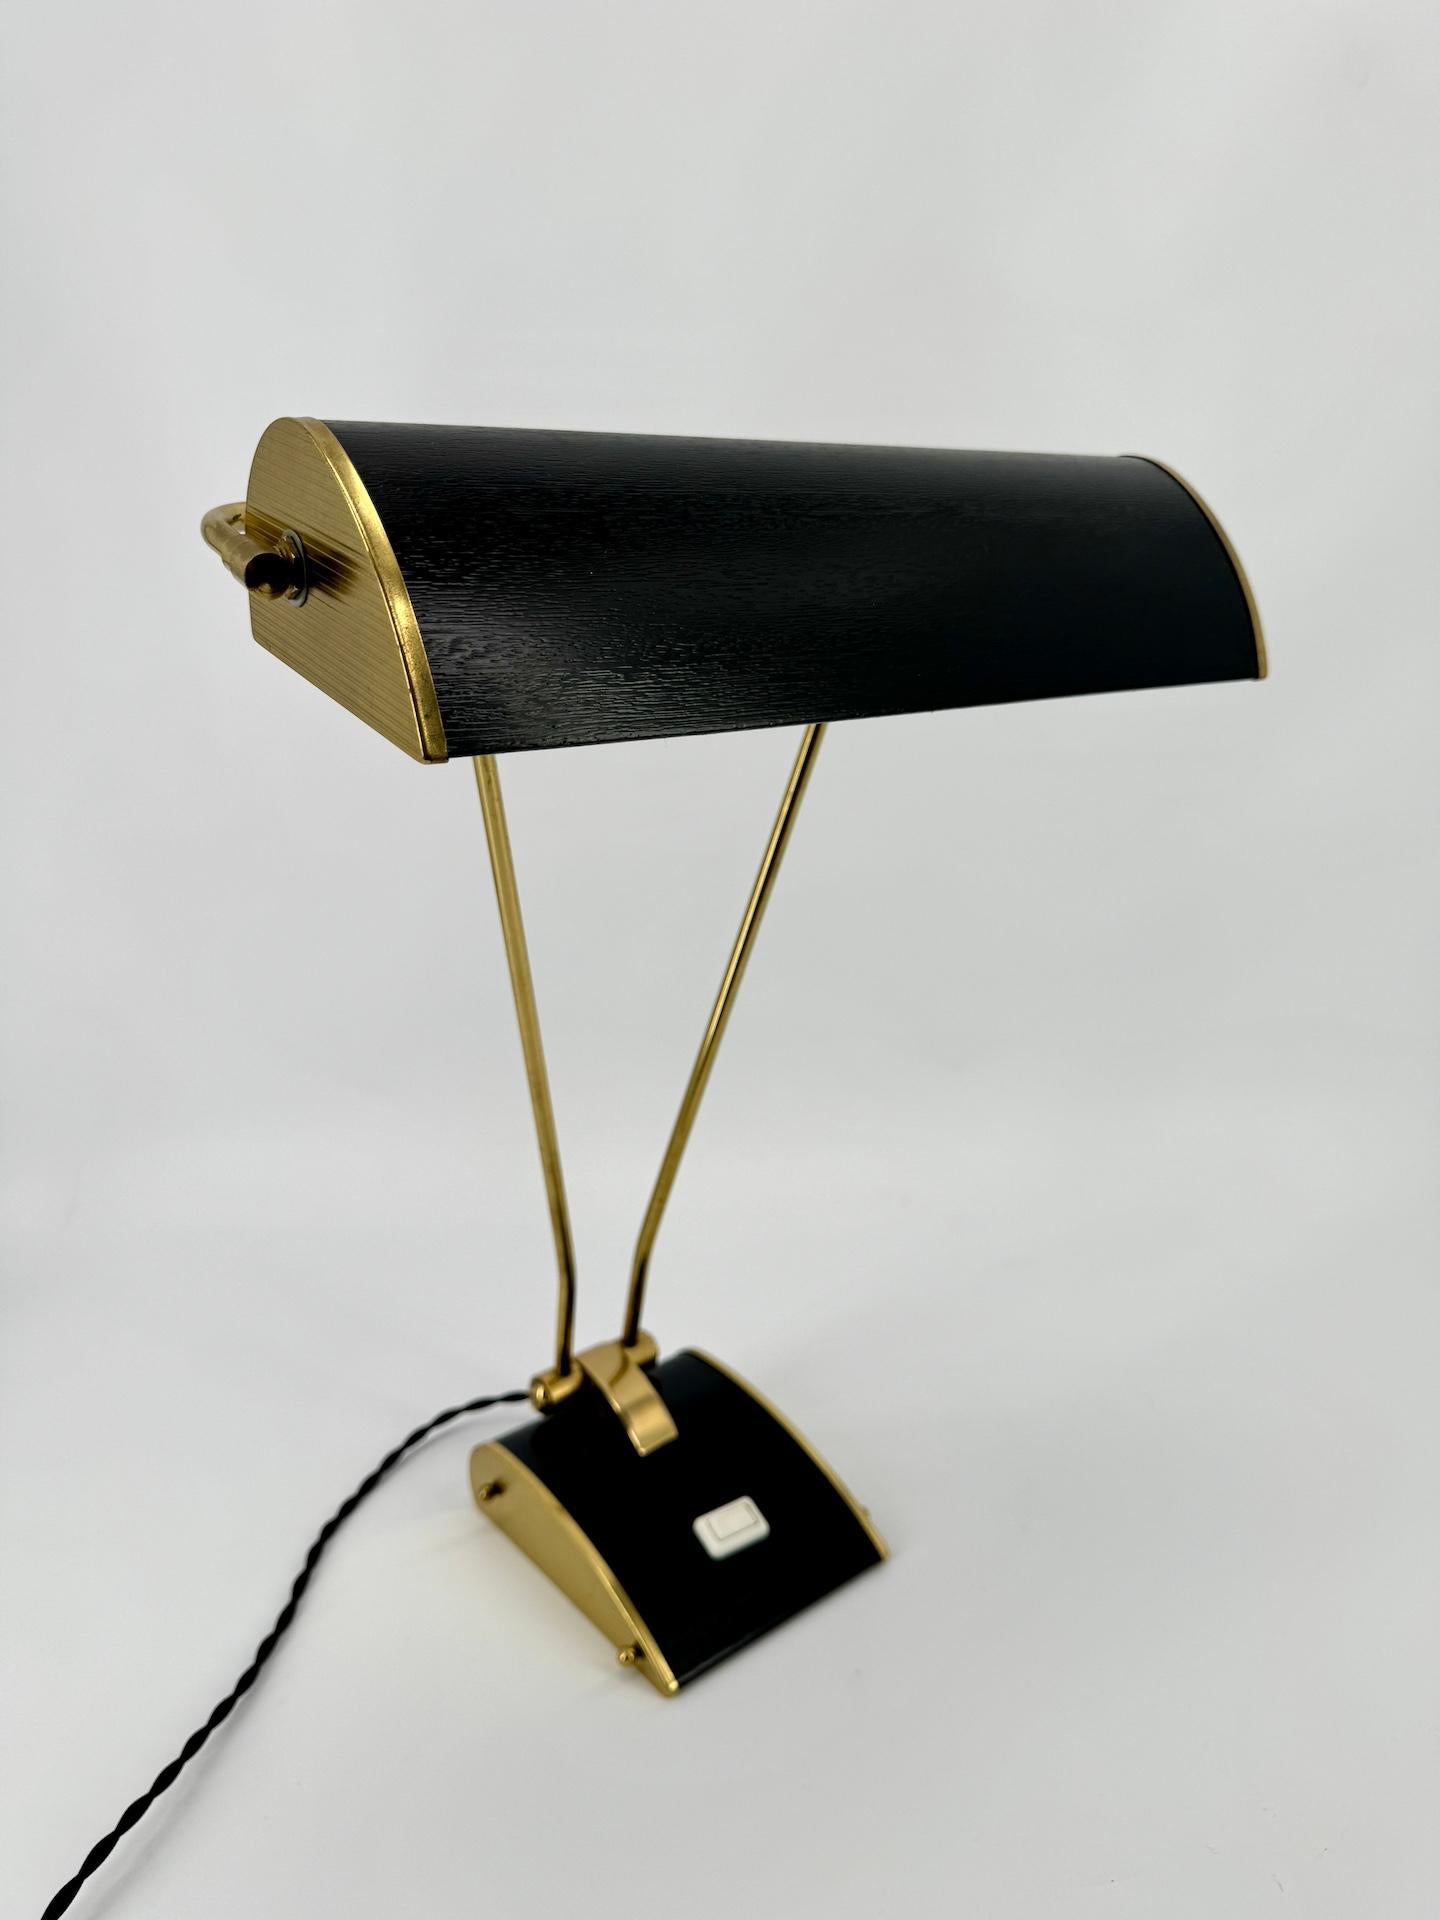 Art Deco mid-century JUMO lamp in streamline black and brass finish.

The company JUMO (contraction of the first two letters of the 3 creators Yves JUjeau and Pierre and André MOunique) was created in 1940. The company produced lighting until the